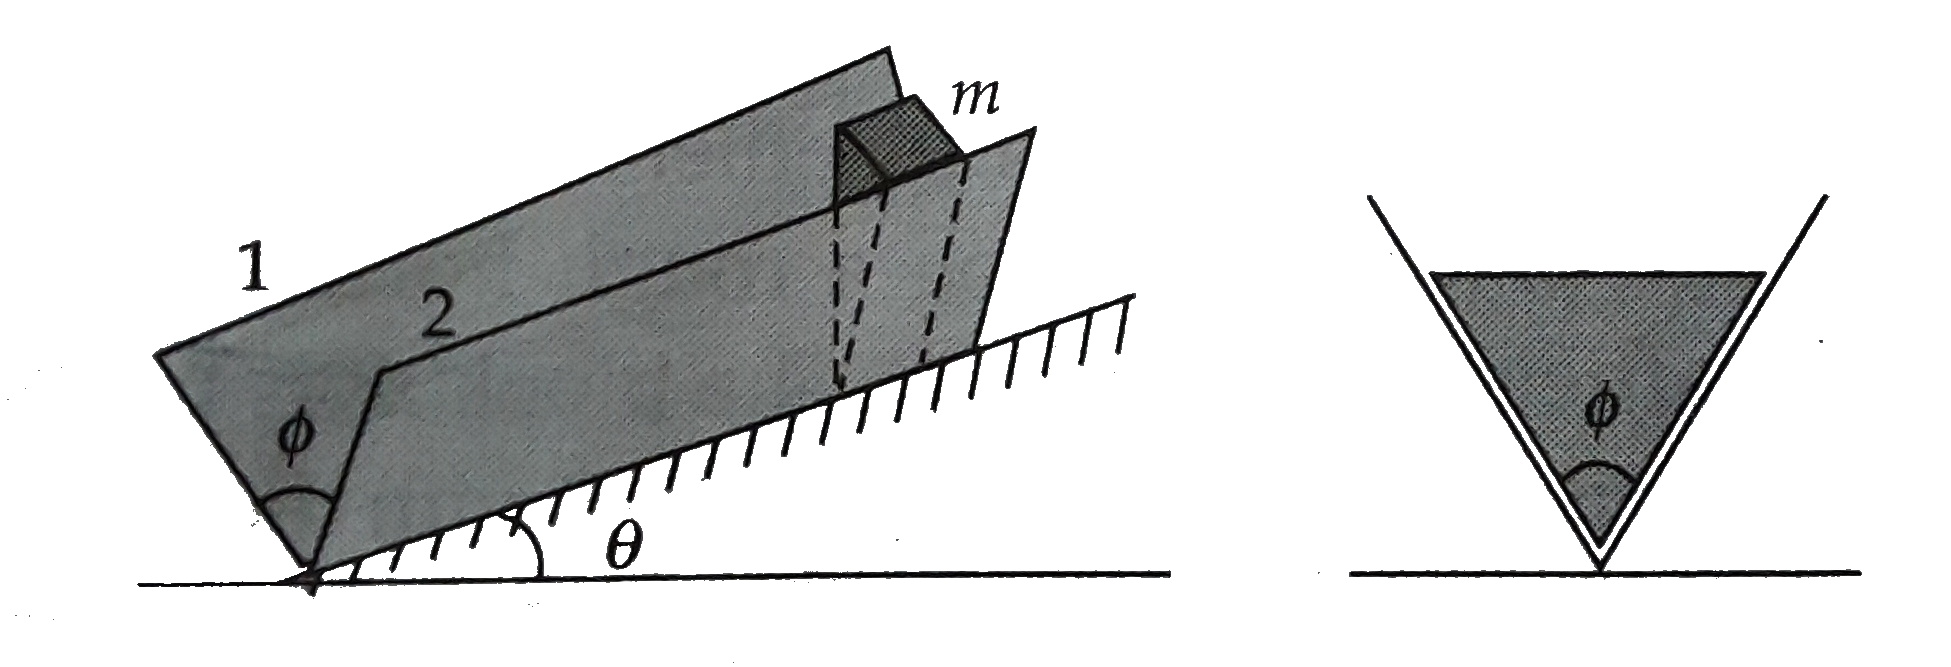 A prismatic block of mass m is kept on a groove . The bottom line of the groove makes an angle theta with horizontal . The angle between the flat surface 1 and 2 making the groove is phi If the groove is symmetrical with the normal to the inclined plane containing the bottom line of the groove      a. Find the coefficient of friction mu(0) between the block and groove so that the block begins to slide.   b. If mu gt mu(0)  find the friction force on the block.   c. If  mu lt mu(0)  find the acceleration of the block.